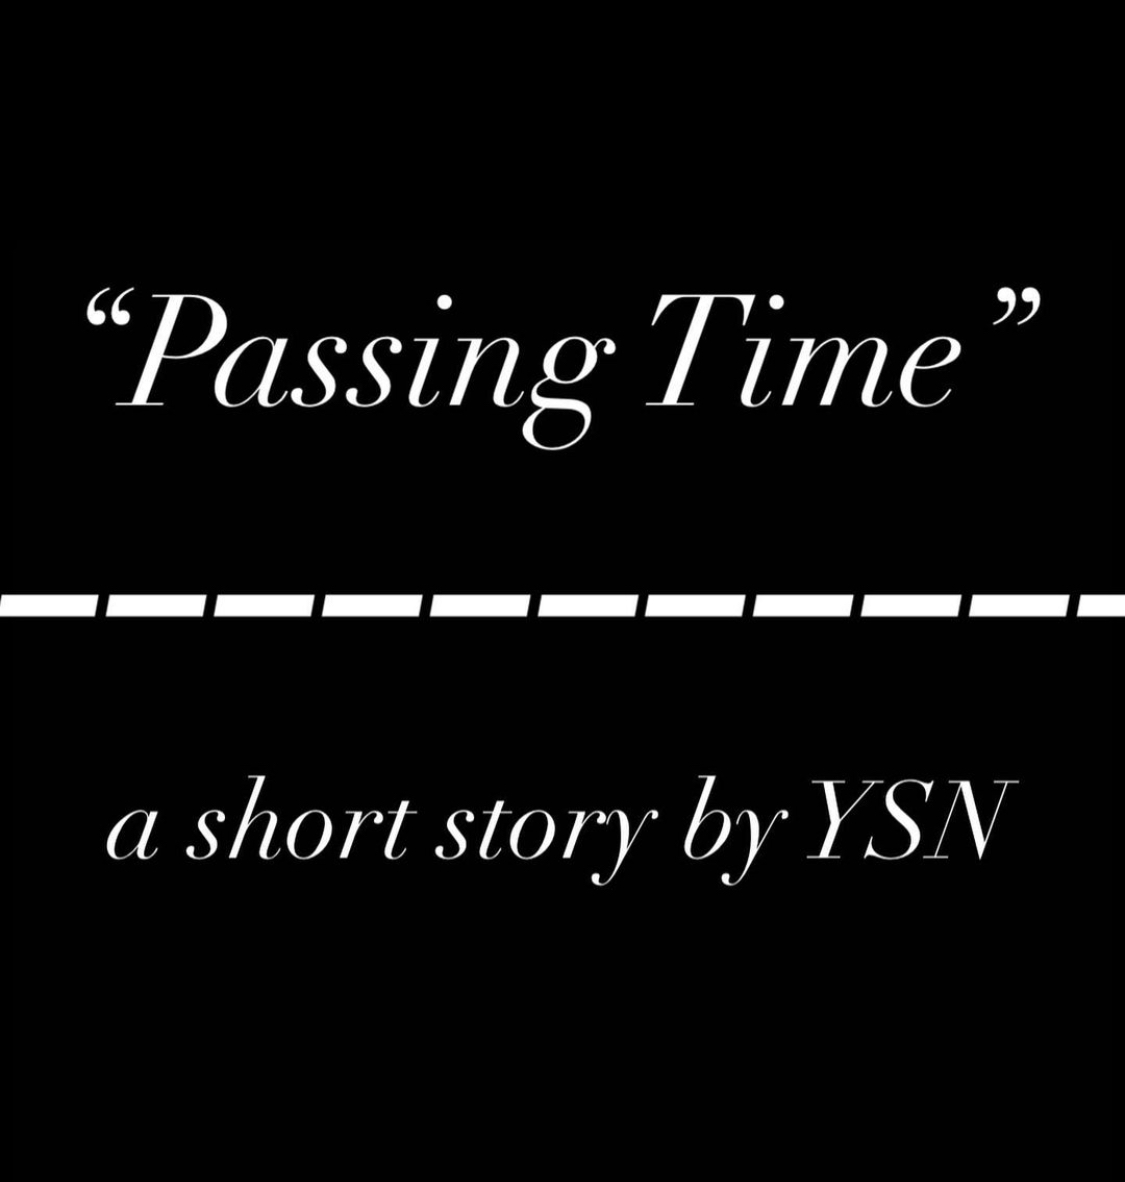 “Passing Time” a short story by YSN